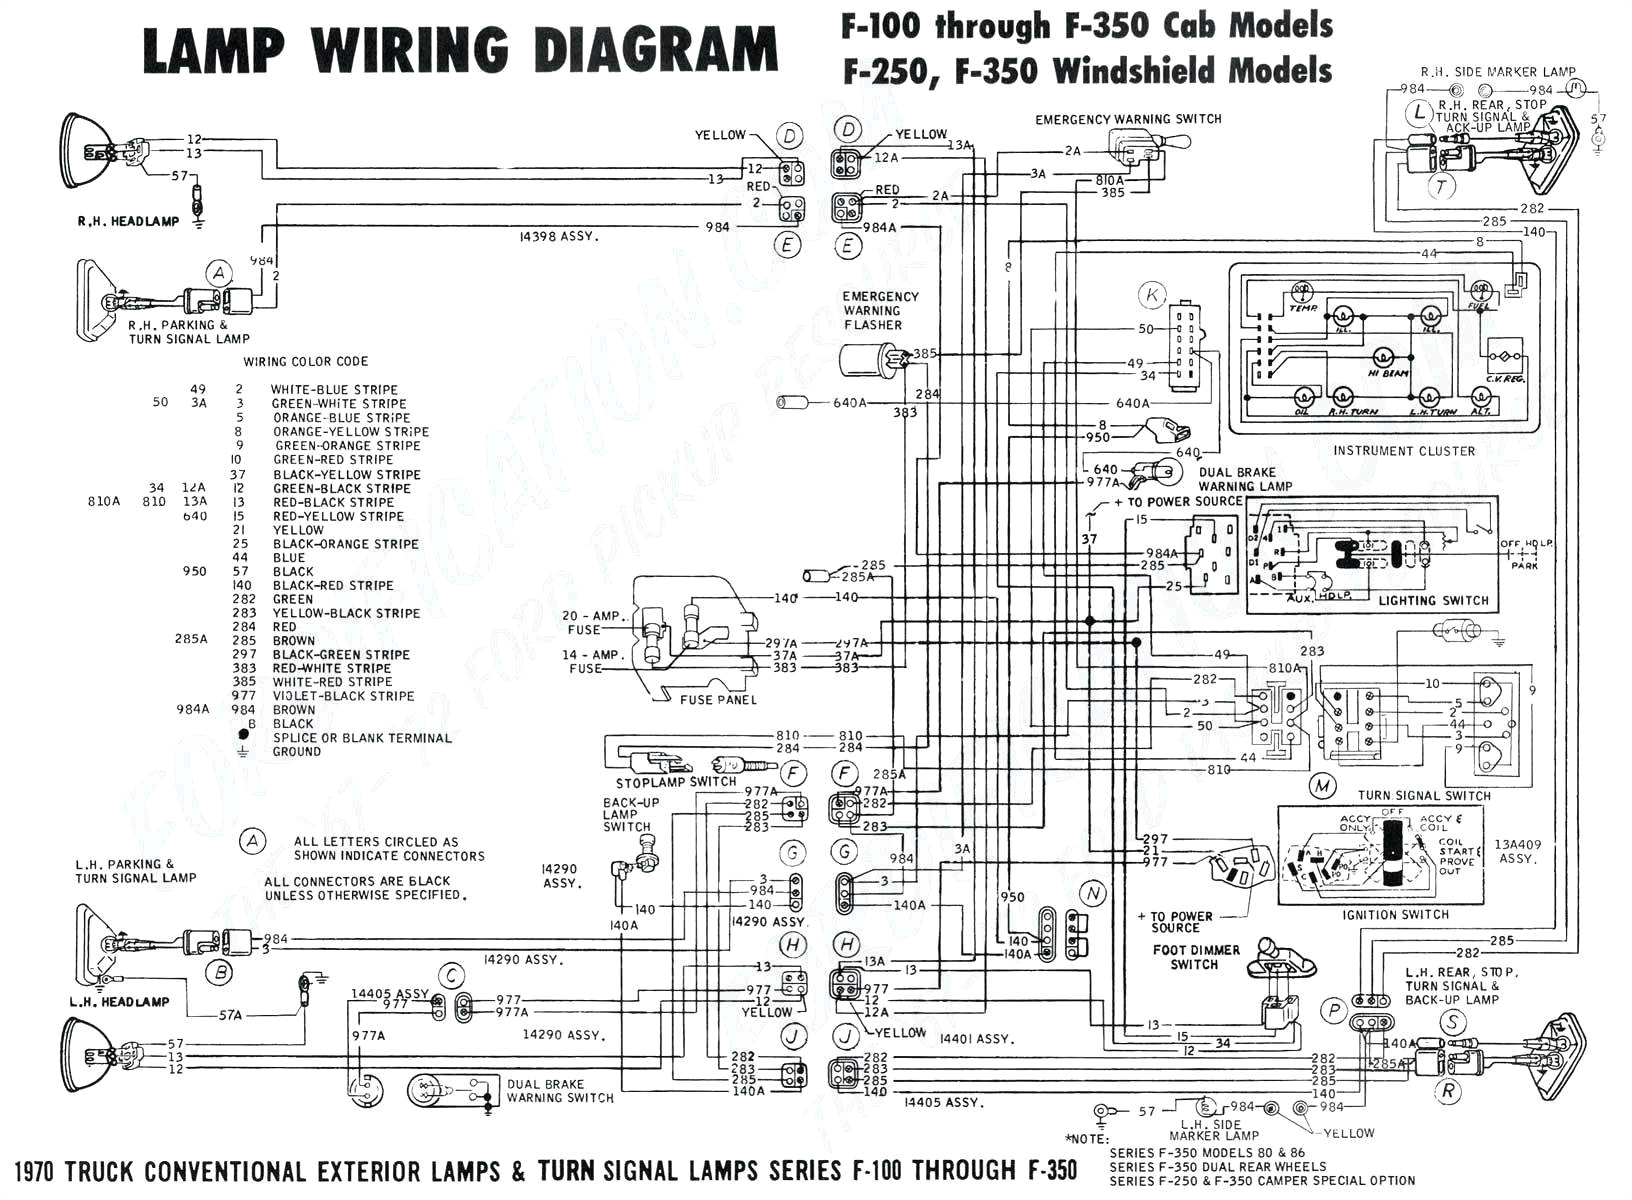 undercarriage diagram to download ford ranger undercarriage diagram 2006 ford ranger wiring diagram door latch free download